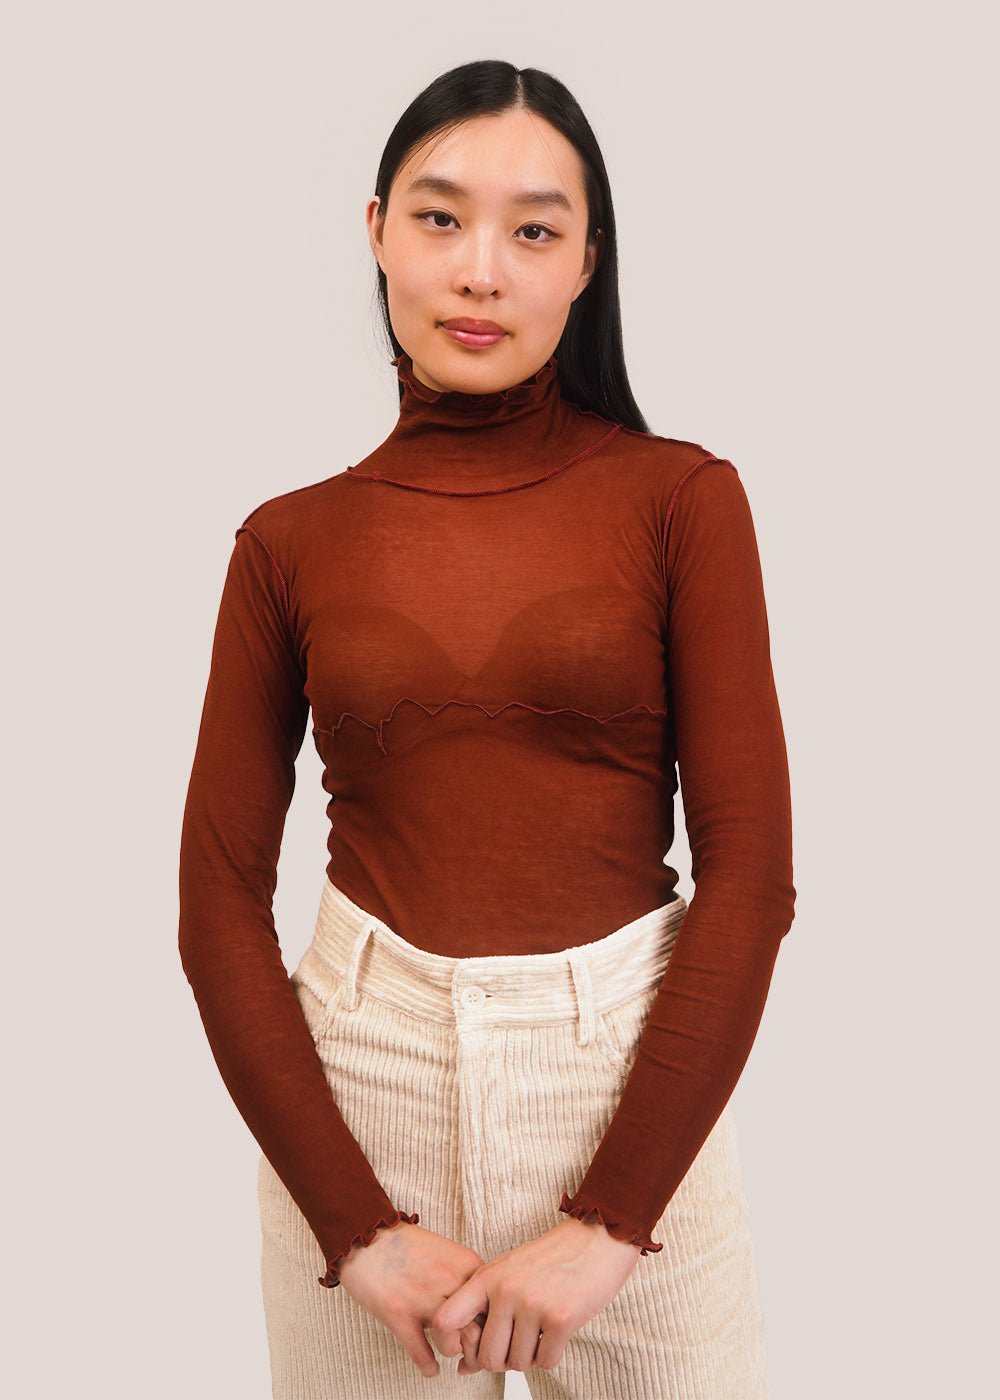 Click to Buy << Body Suits for Women orange Long Sleeve Turleneck